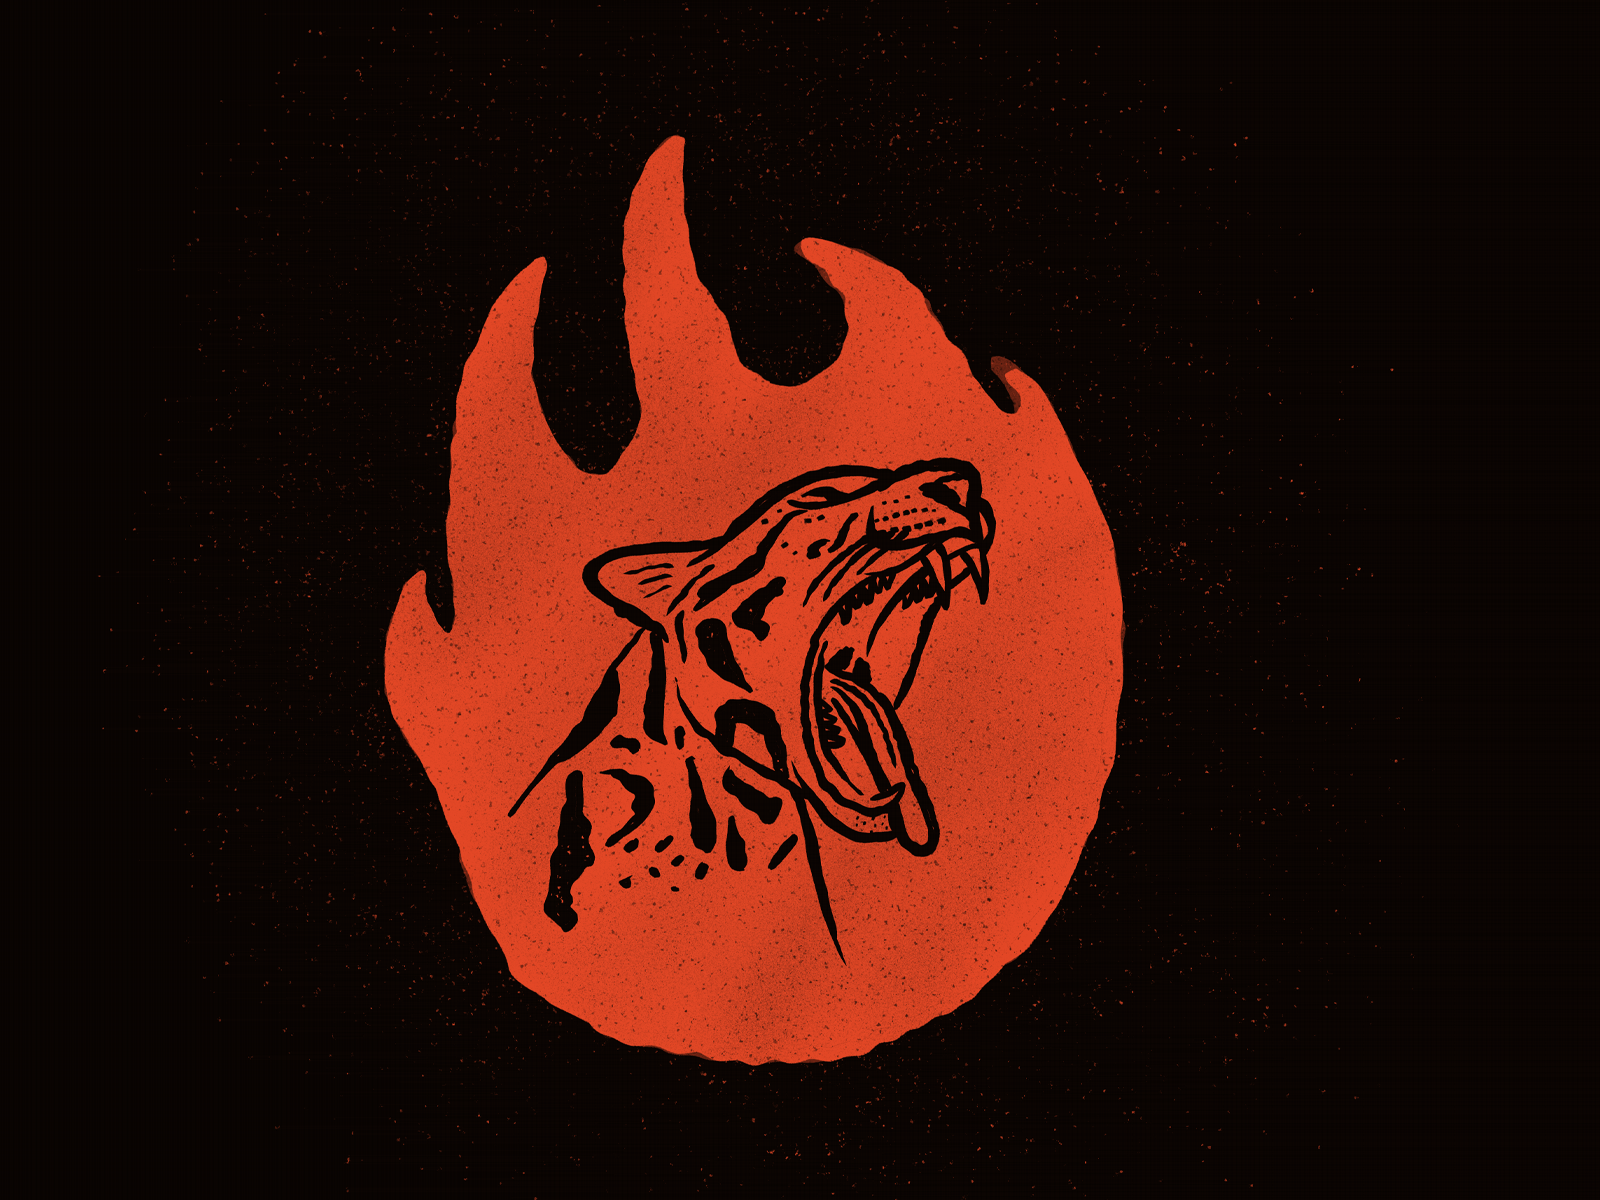 Breathe Fire, 2023 animation cat fire flame flames food foodie graphic design heat illustration jaguar menu mexican ocelot peppers spice spices spicy